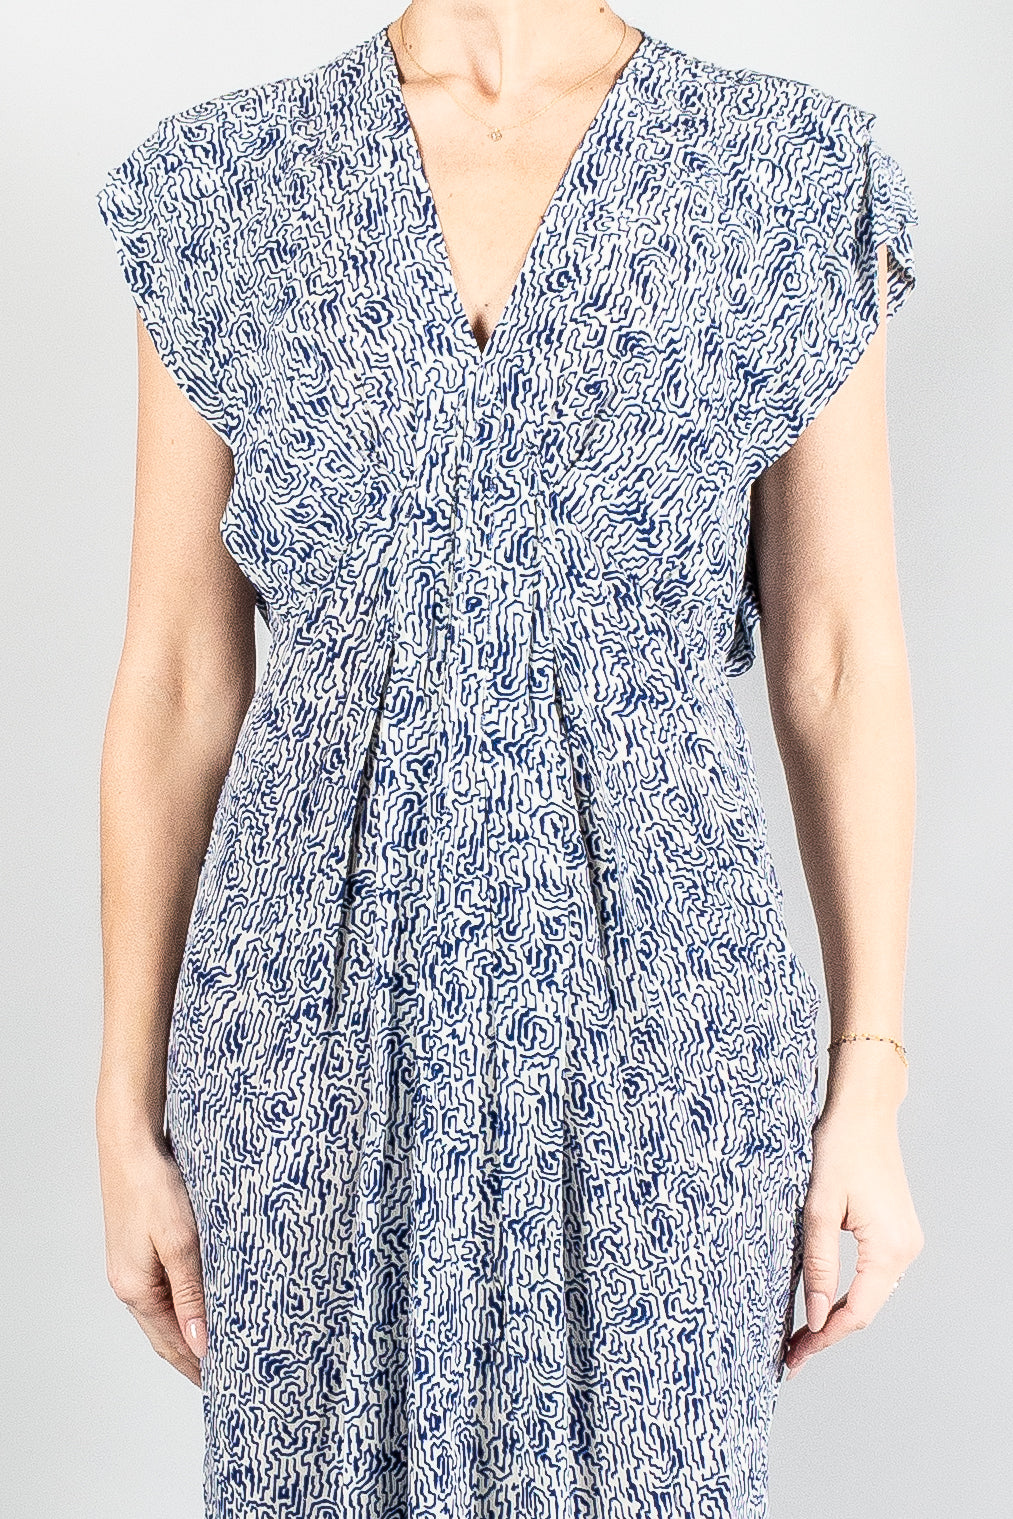 Isabel Marant Etoile Epolia Dress-Dresses and Jumpsuits-Misch-Boutique-Vancouver-Canada-misch.ca